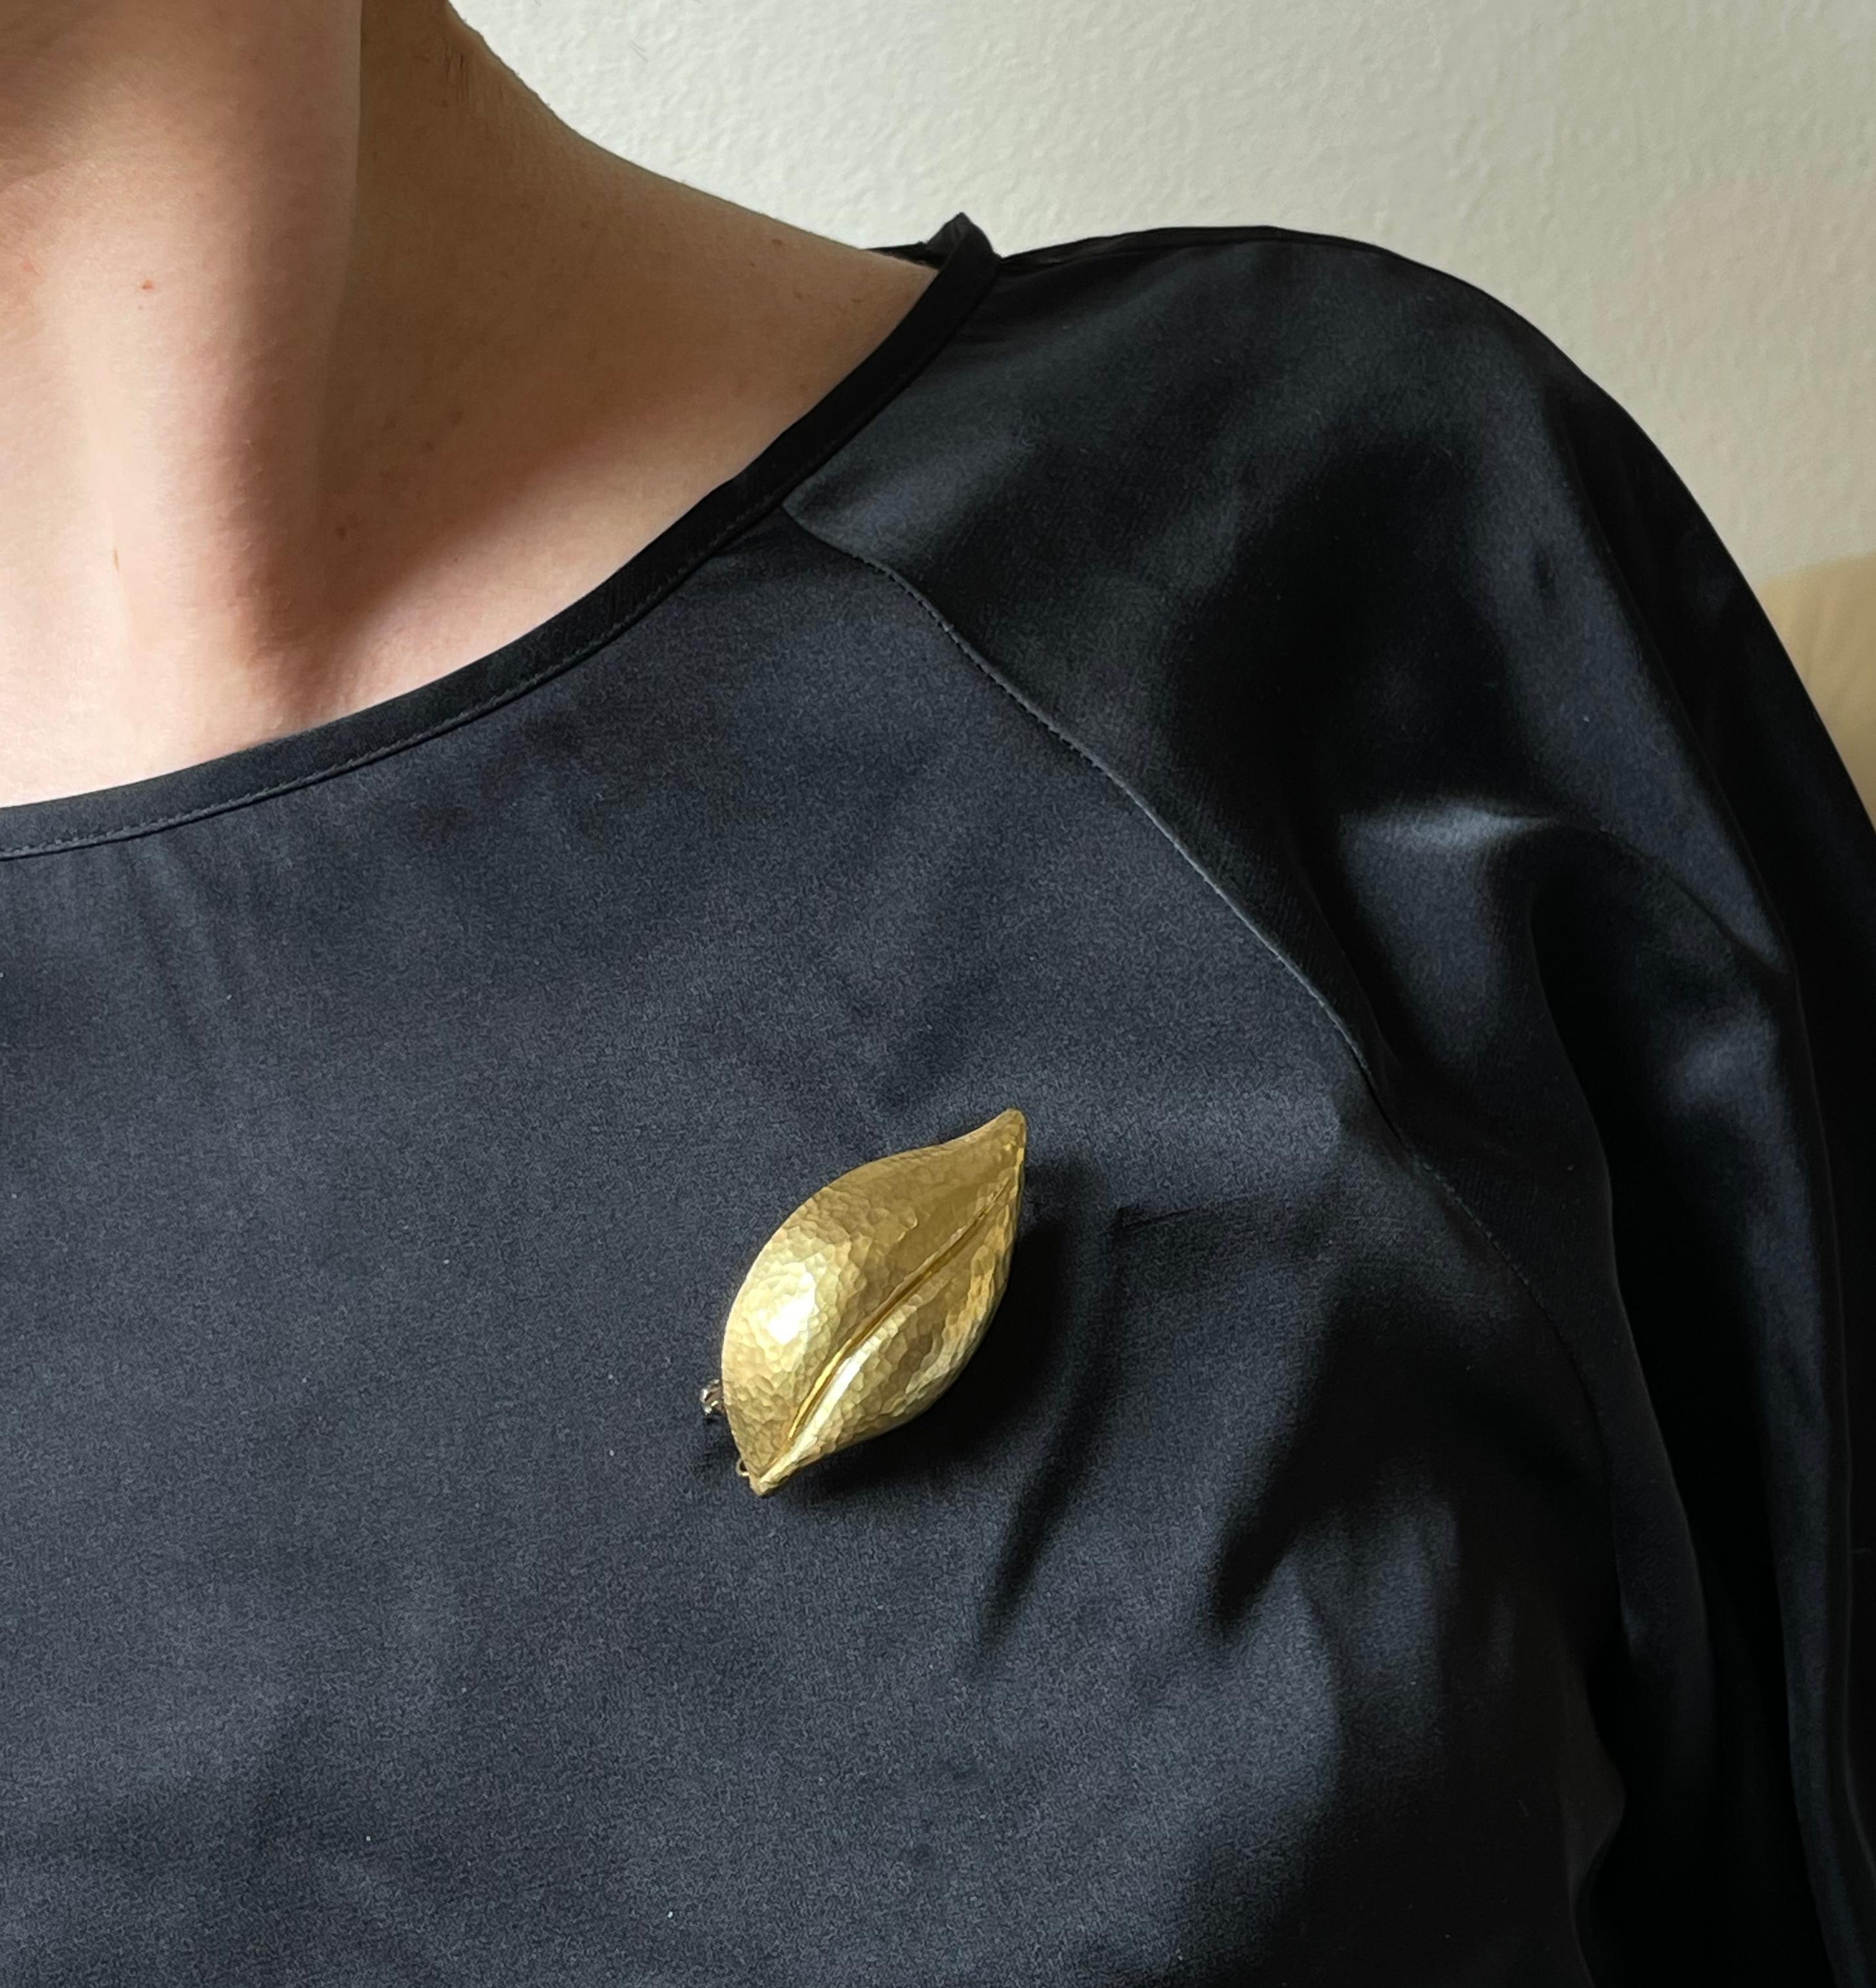 18k hammered gold leaf motif brooch by Paloma Picasso for Tiffany & Co. The piece measures 2